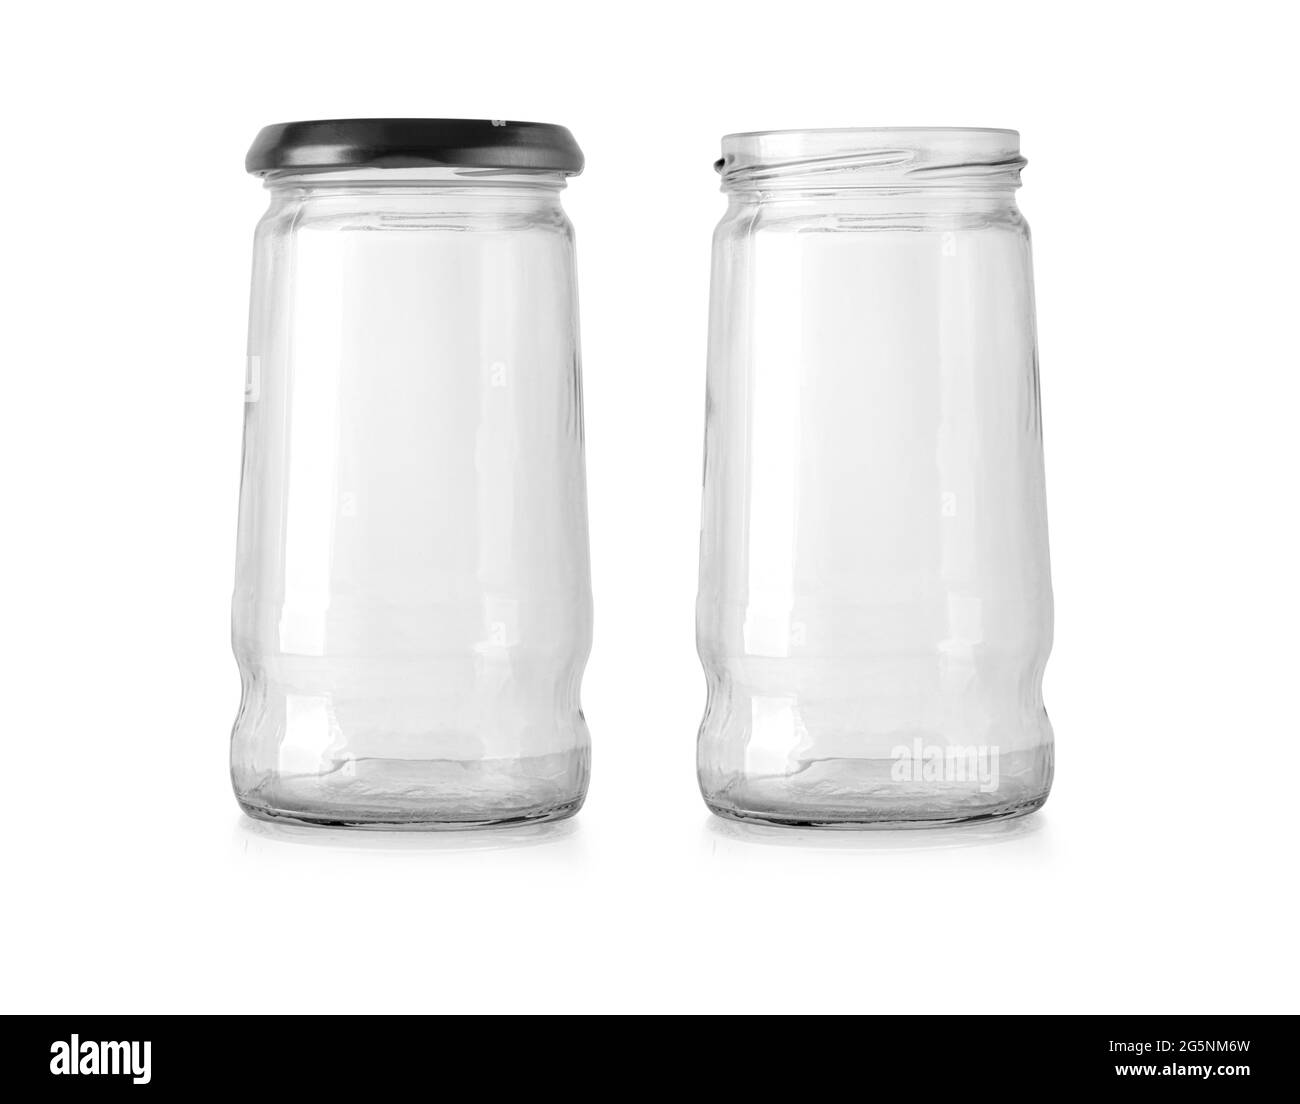 Jar glass isolated on white background with clipping path Stock Photo